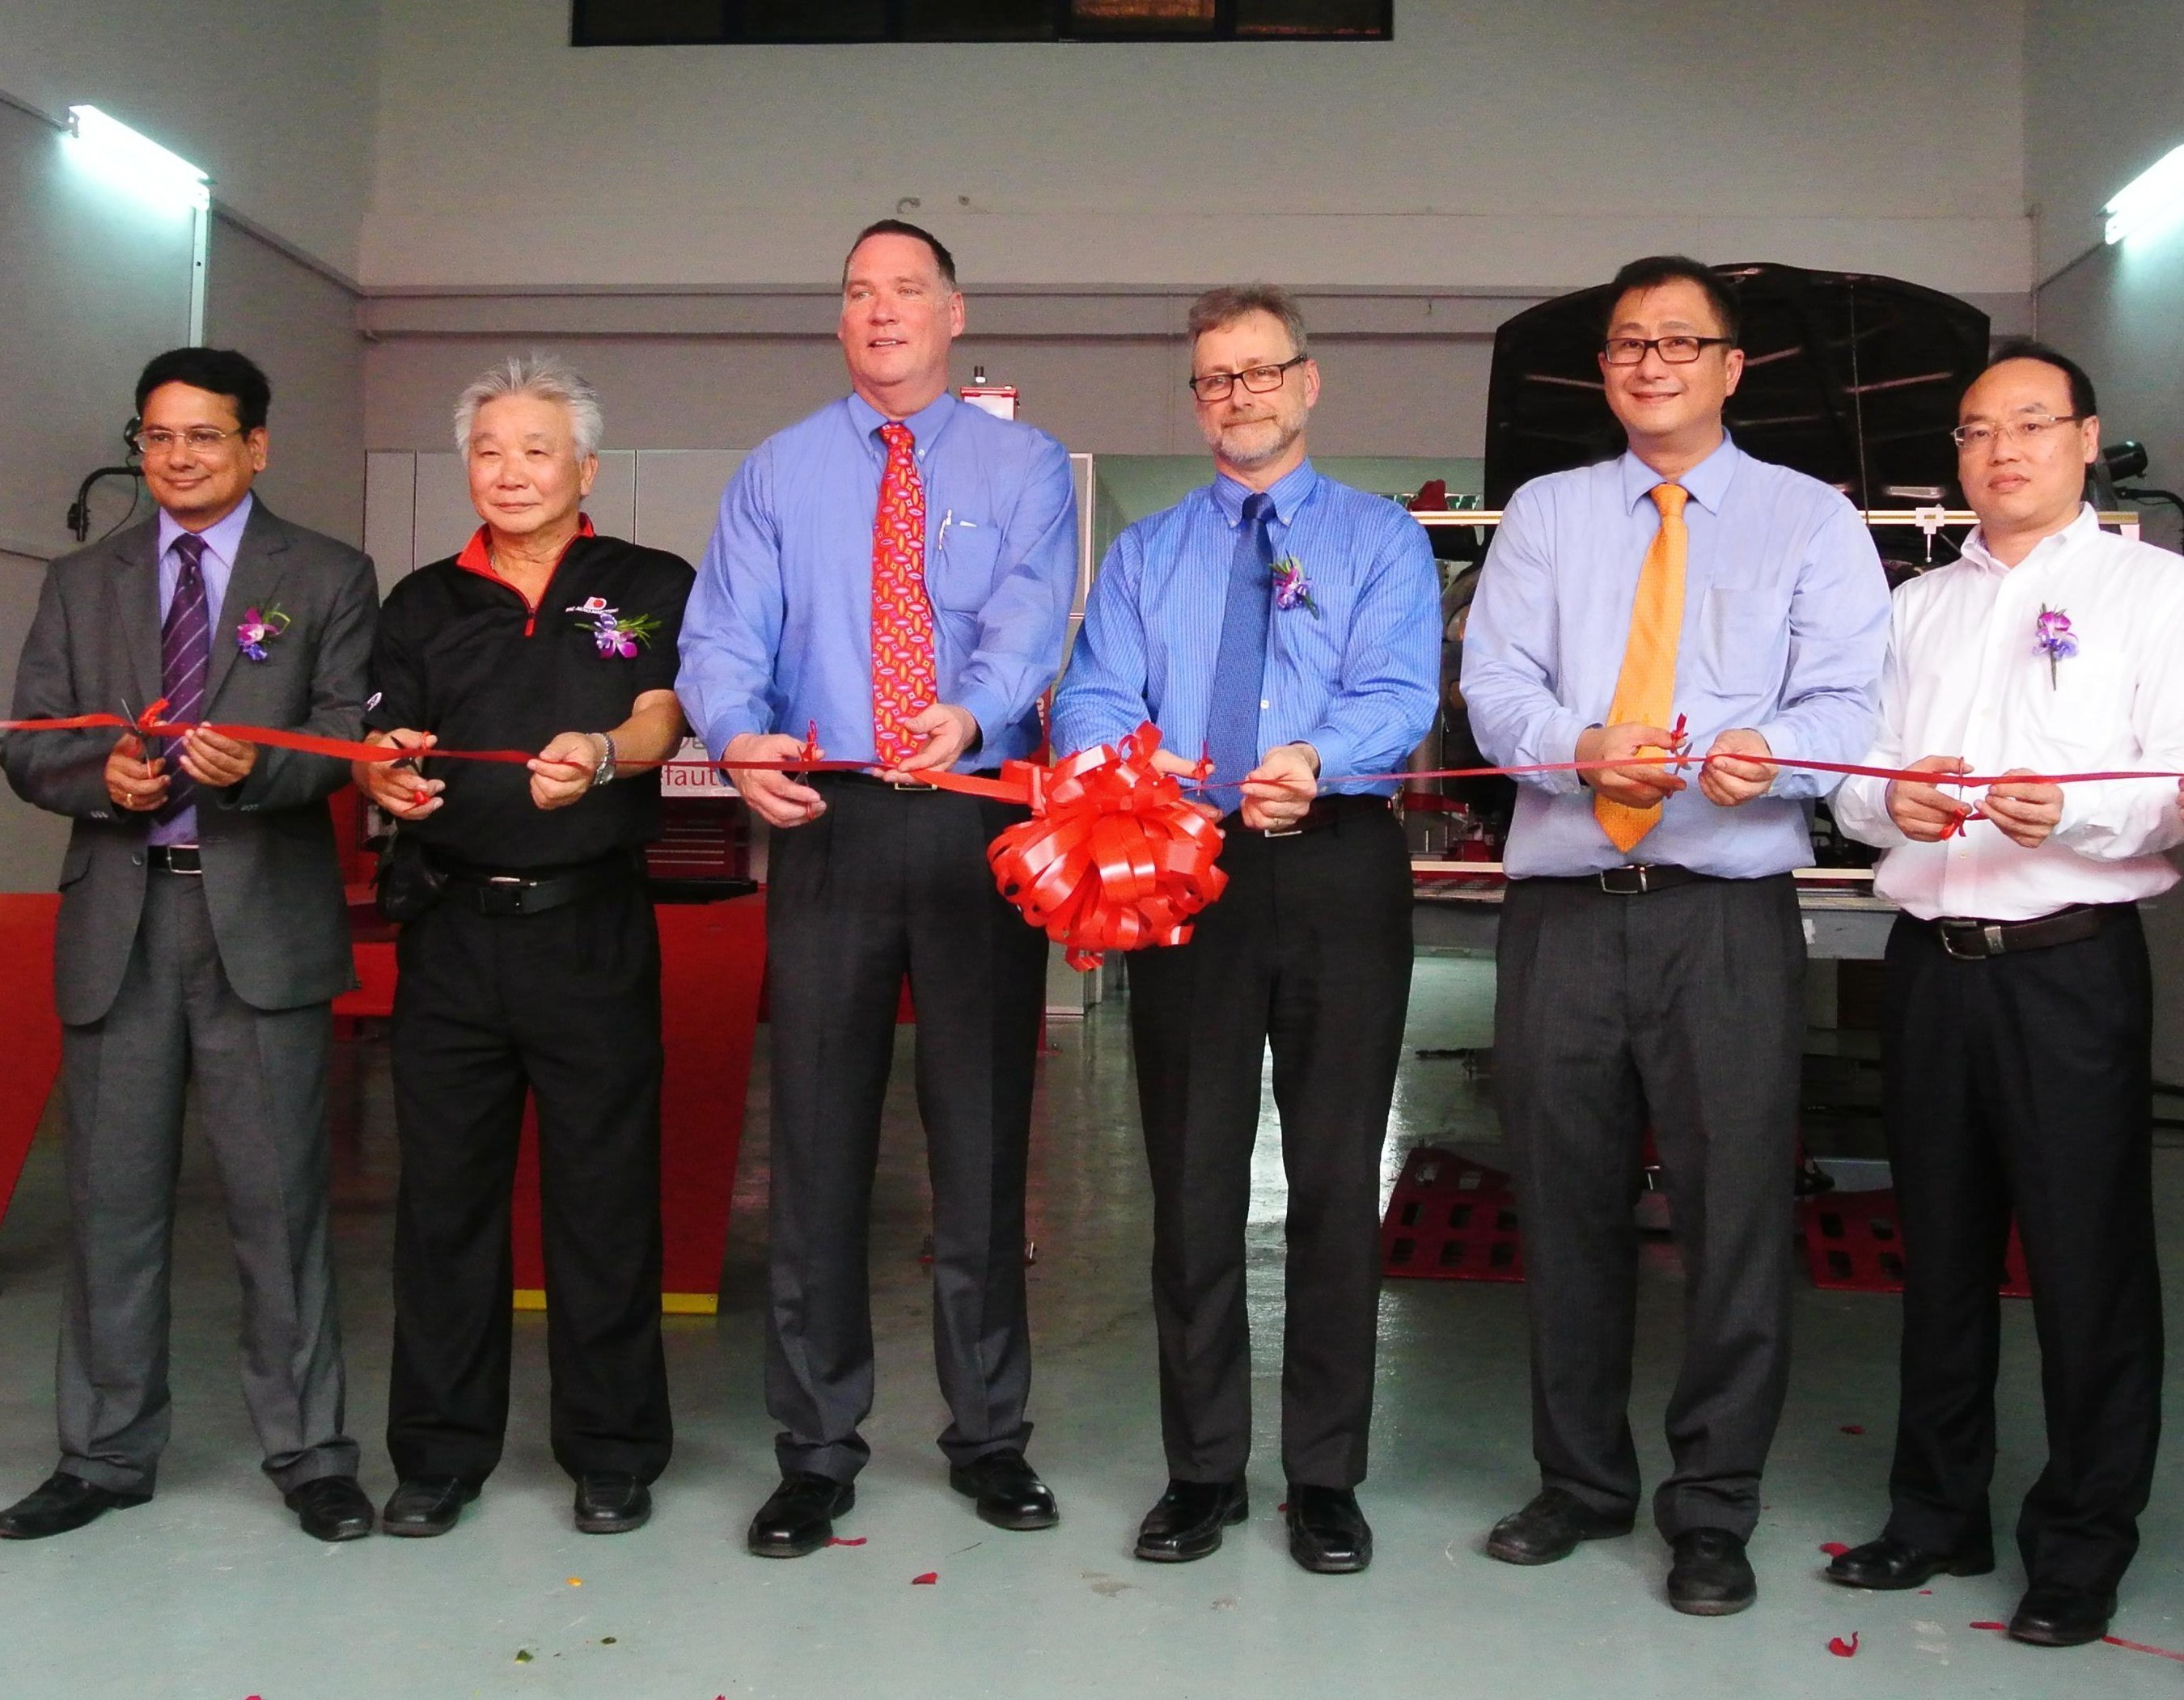 The Chief Automotive Technologies team of (from left to right) Surya Prakash, Stephen Wong, Steve Slaughter, Lee Daugherty, Jason Hans and Li Xun recently helped the company open a new training and specification center in Kuala Lumpur, Malaysia. The facility will give Chief greater access to vehicles built in the Asia-Pacific region for measuring, providing customers with better collision repair specs. (PRNewsFoto/Chief Automotive Technologies)